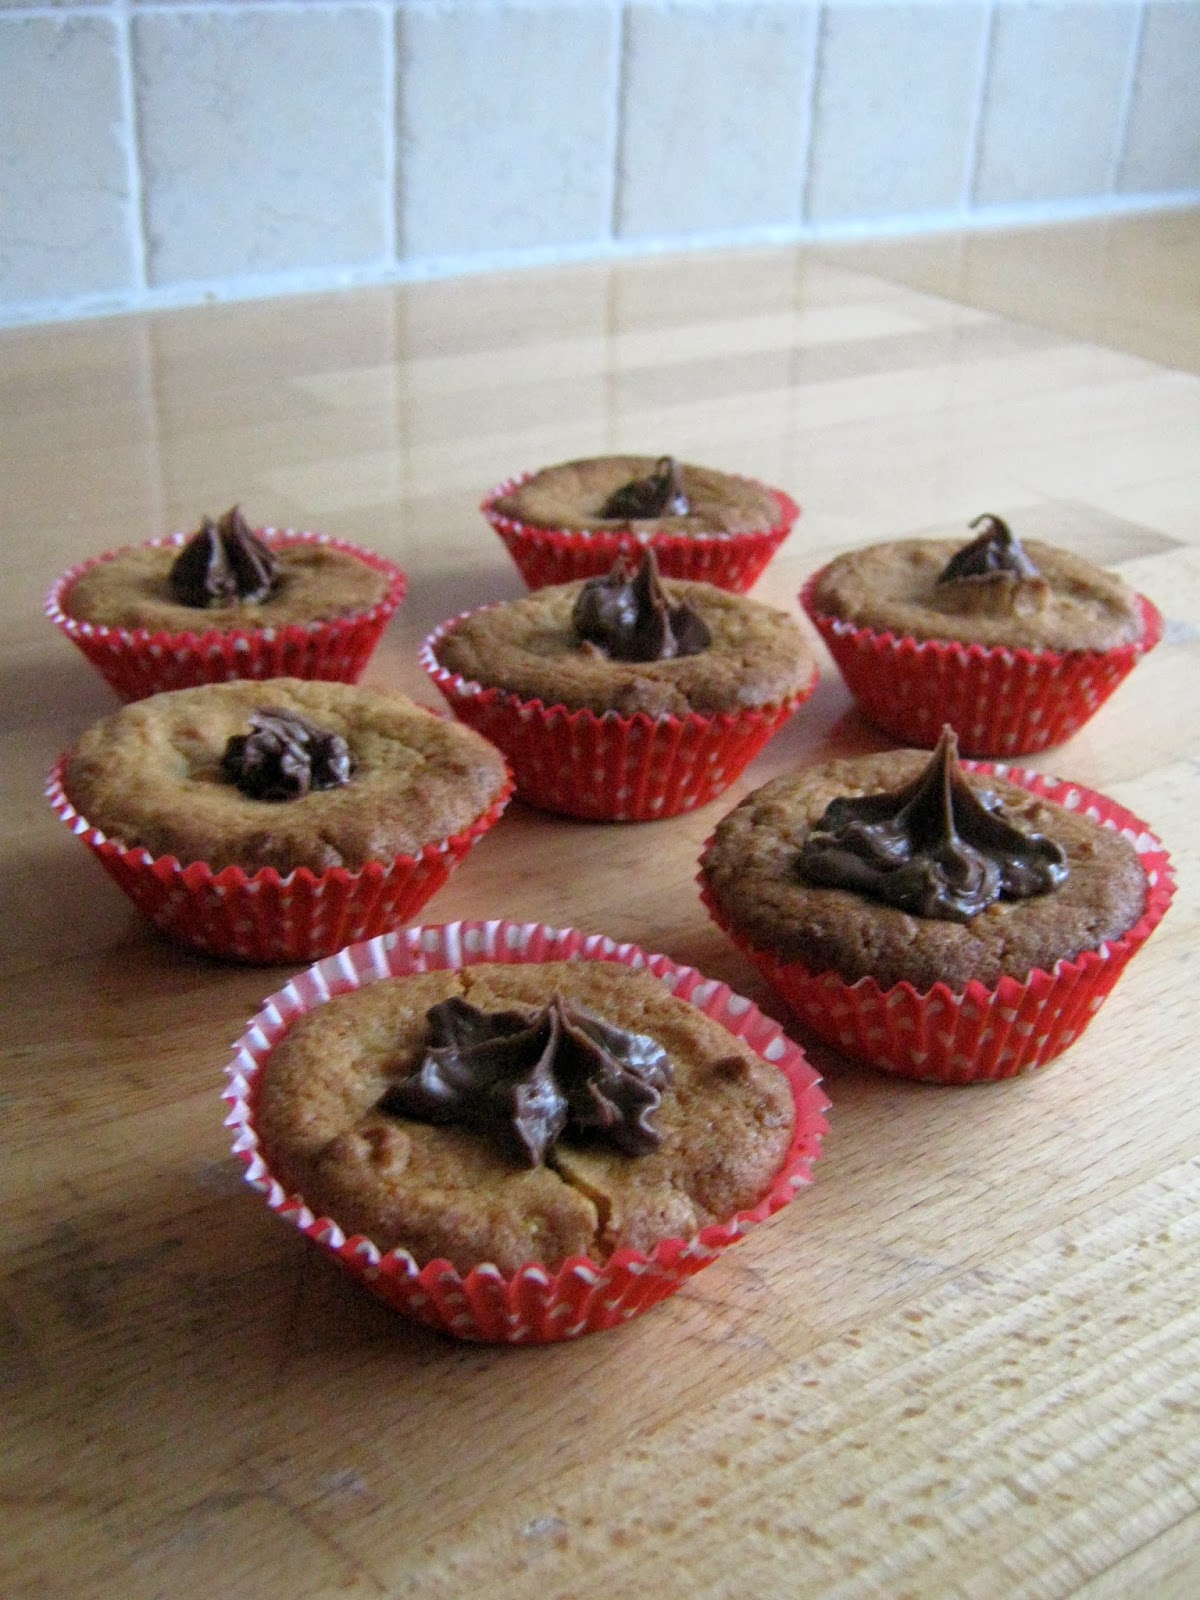 Peanut Butter and Chocolate Cupcakes